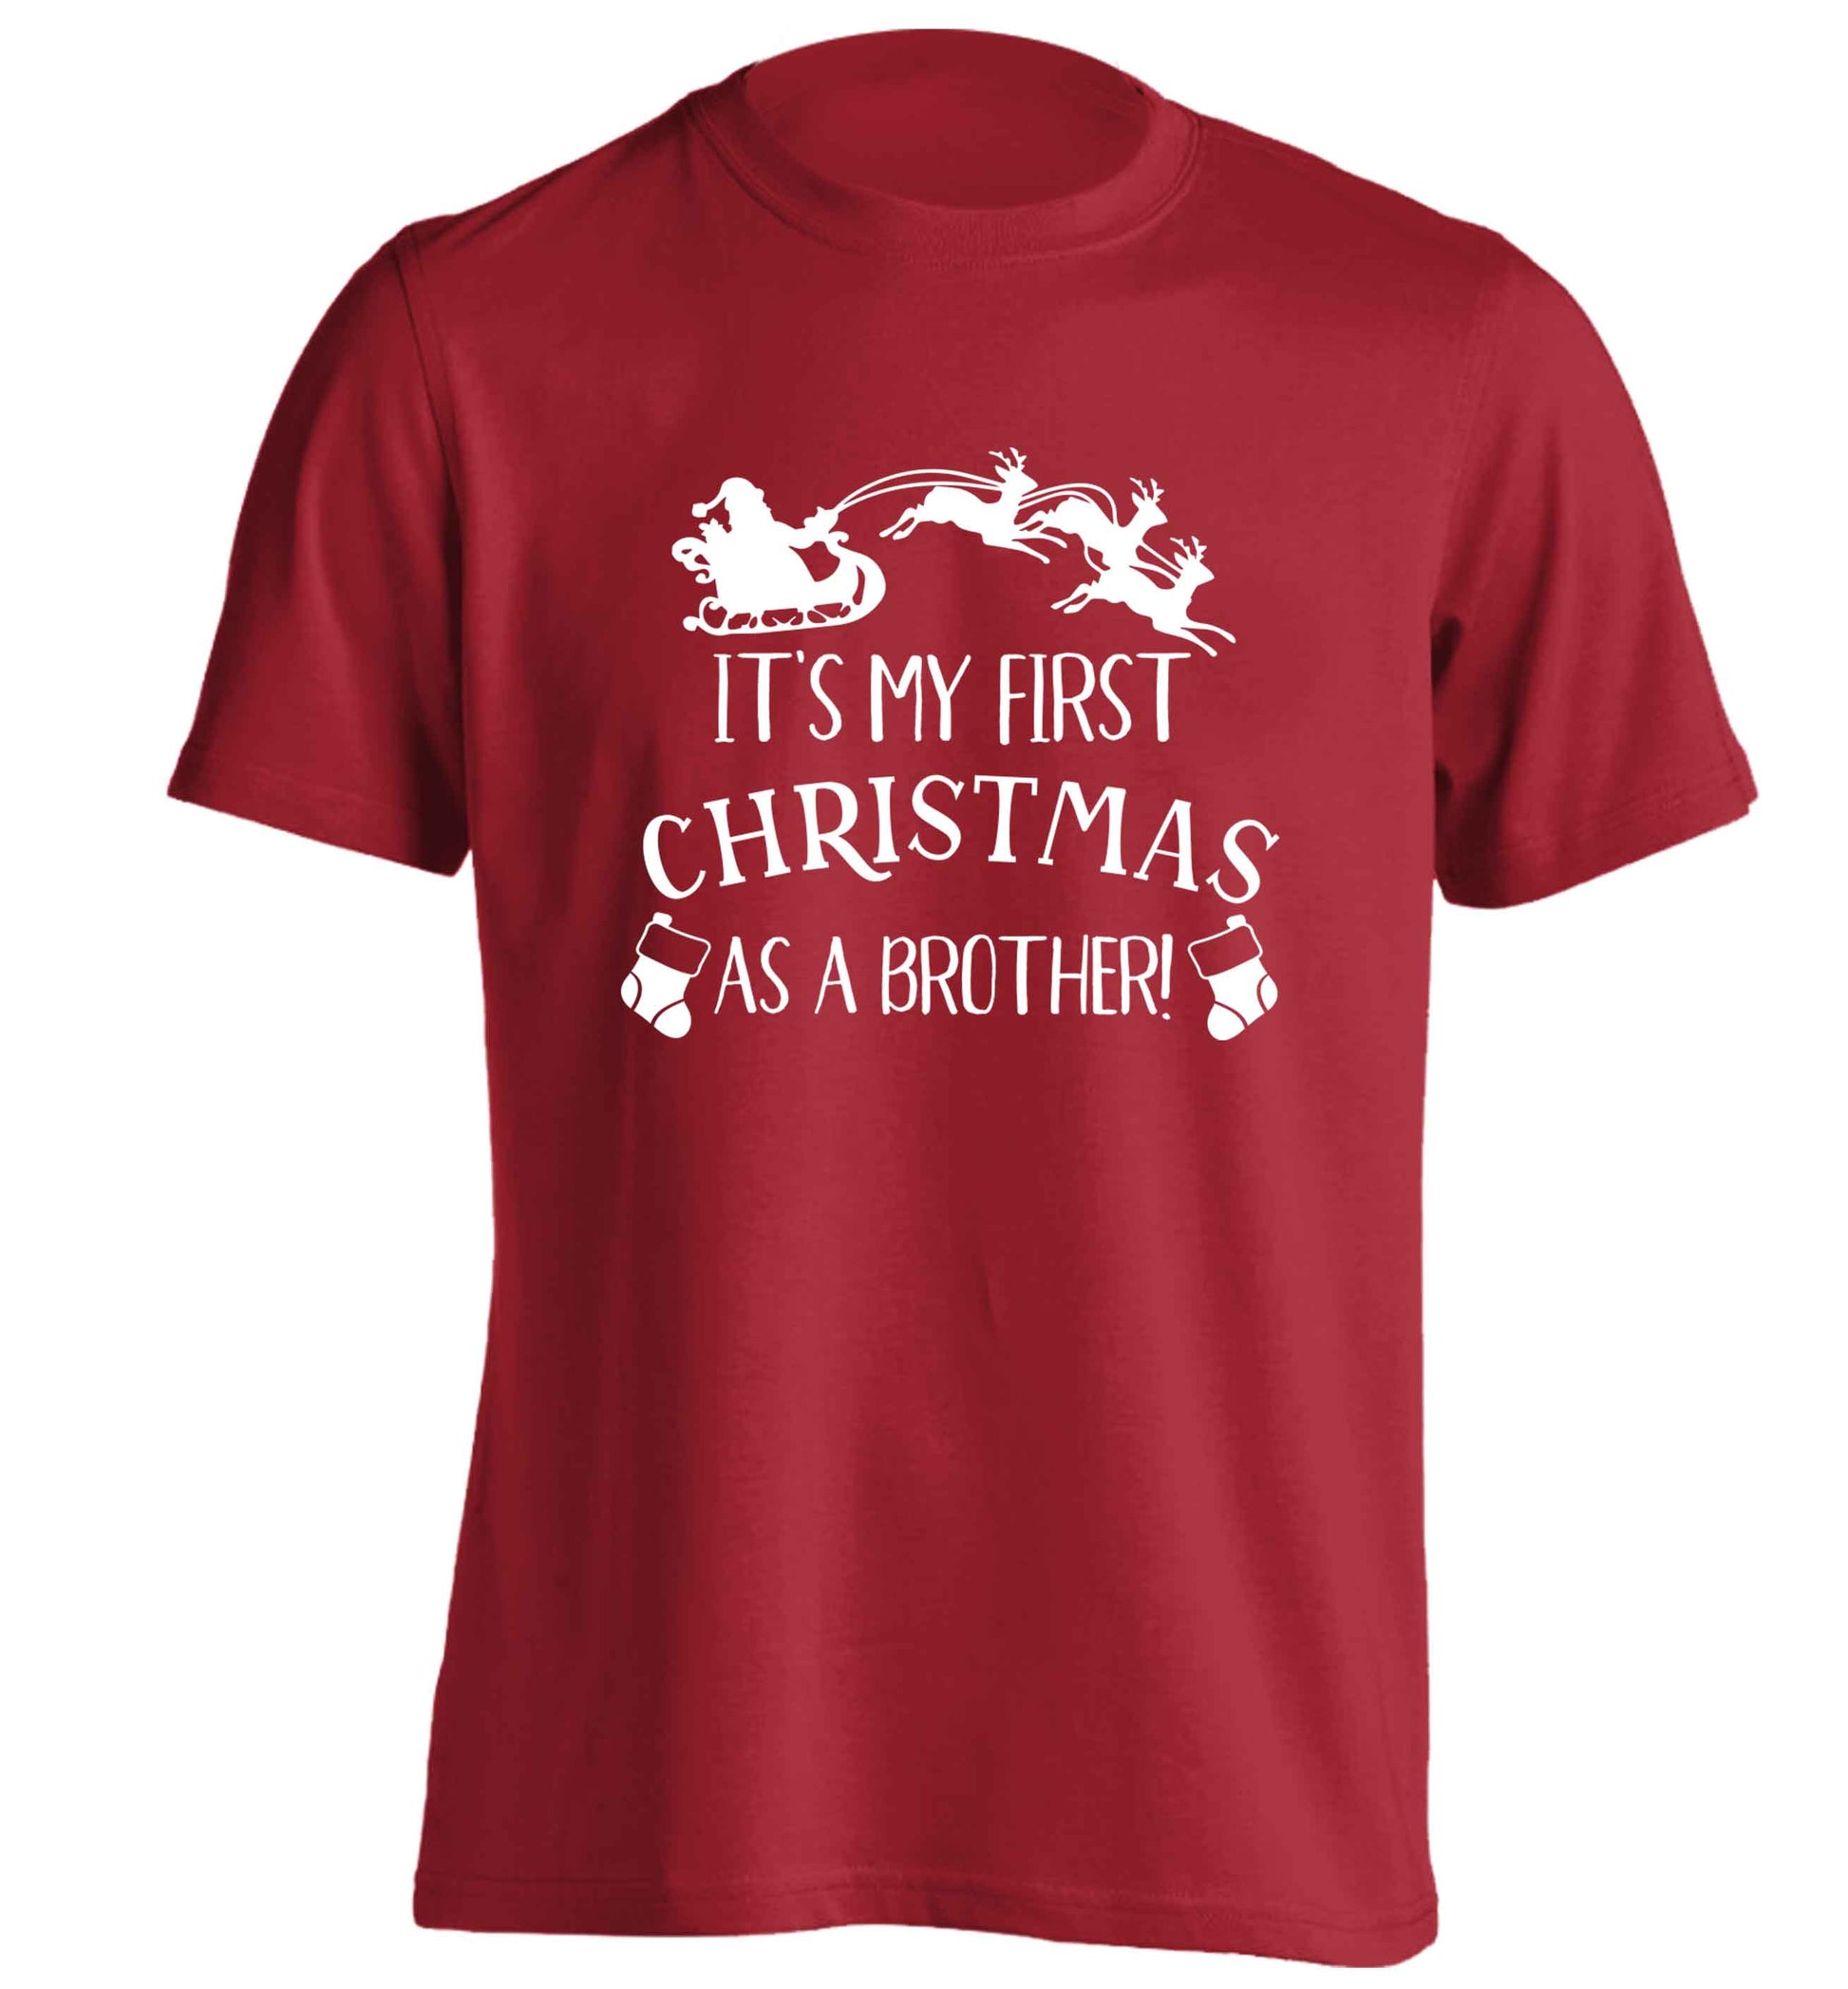 It's my first Christmas as a brother! adults unisex red Tshirt 2XL